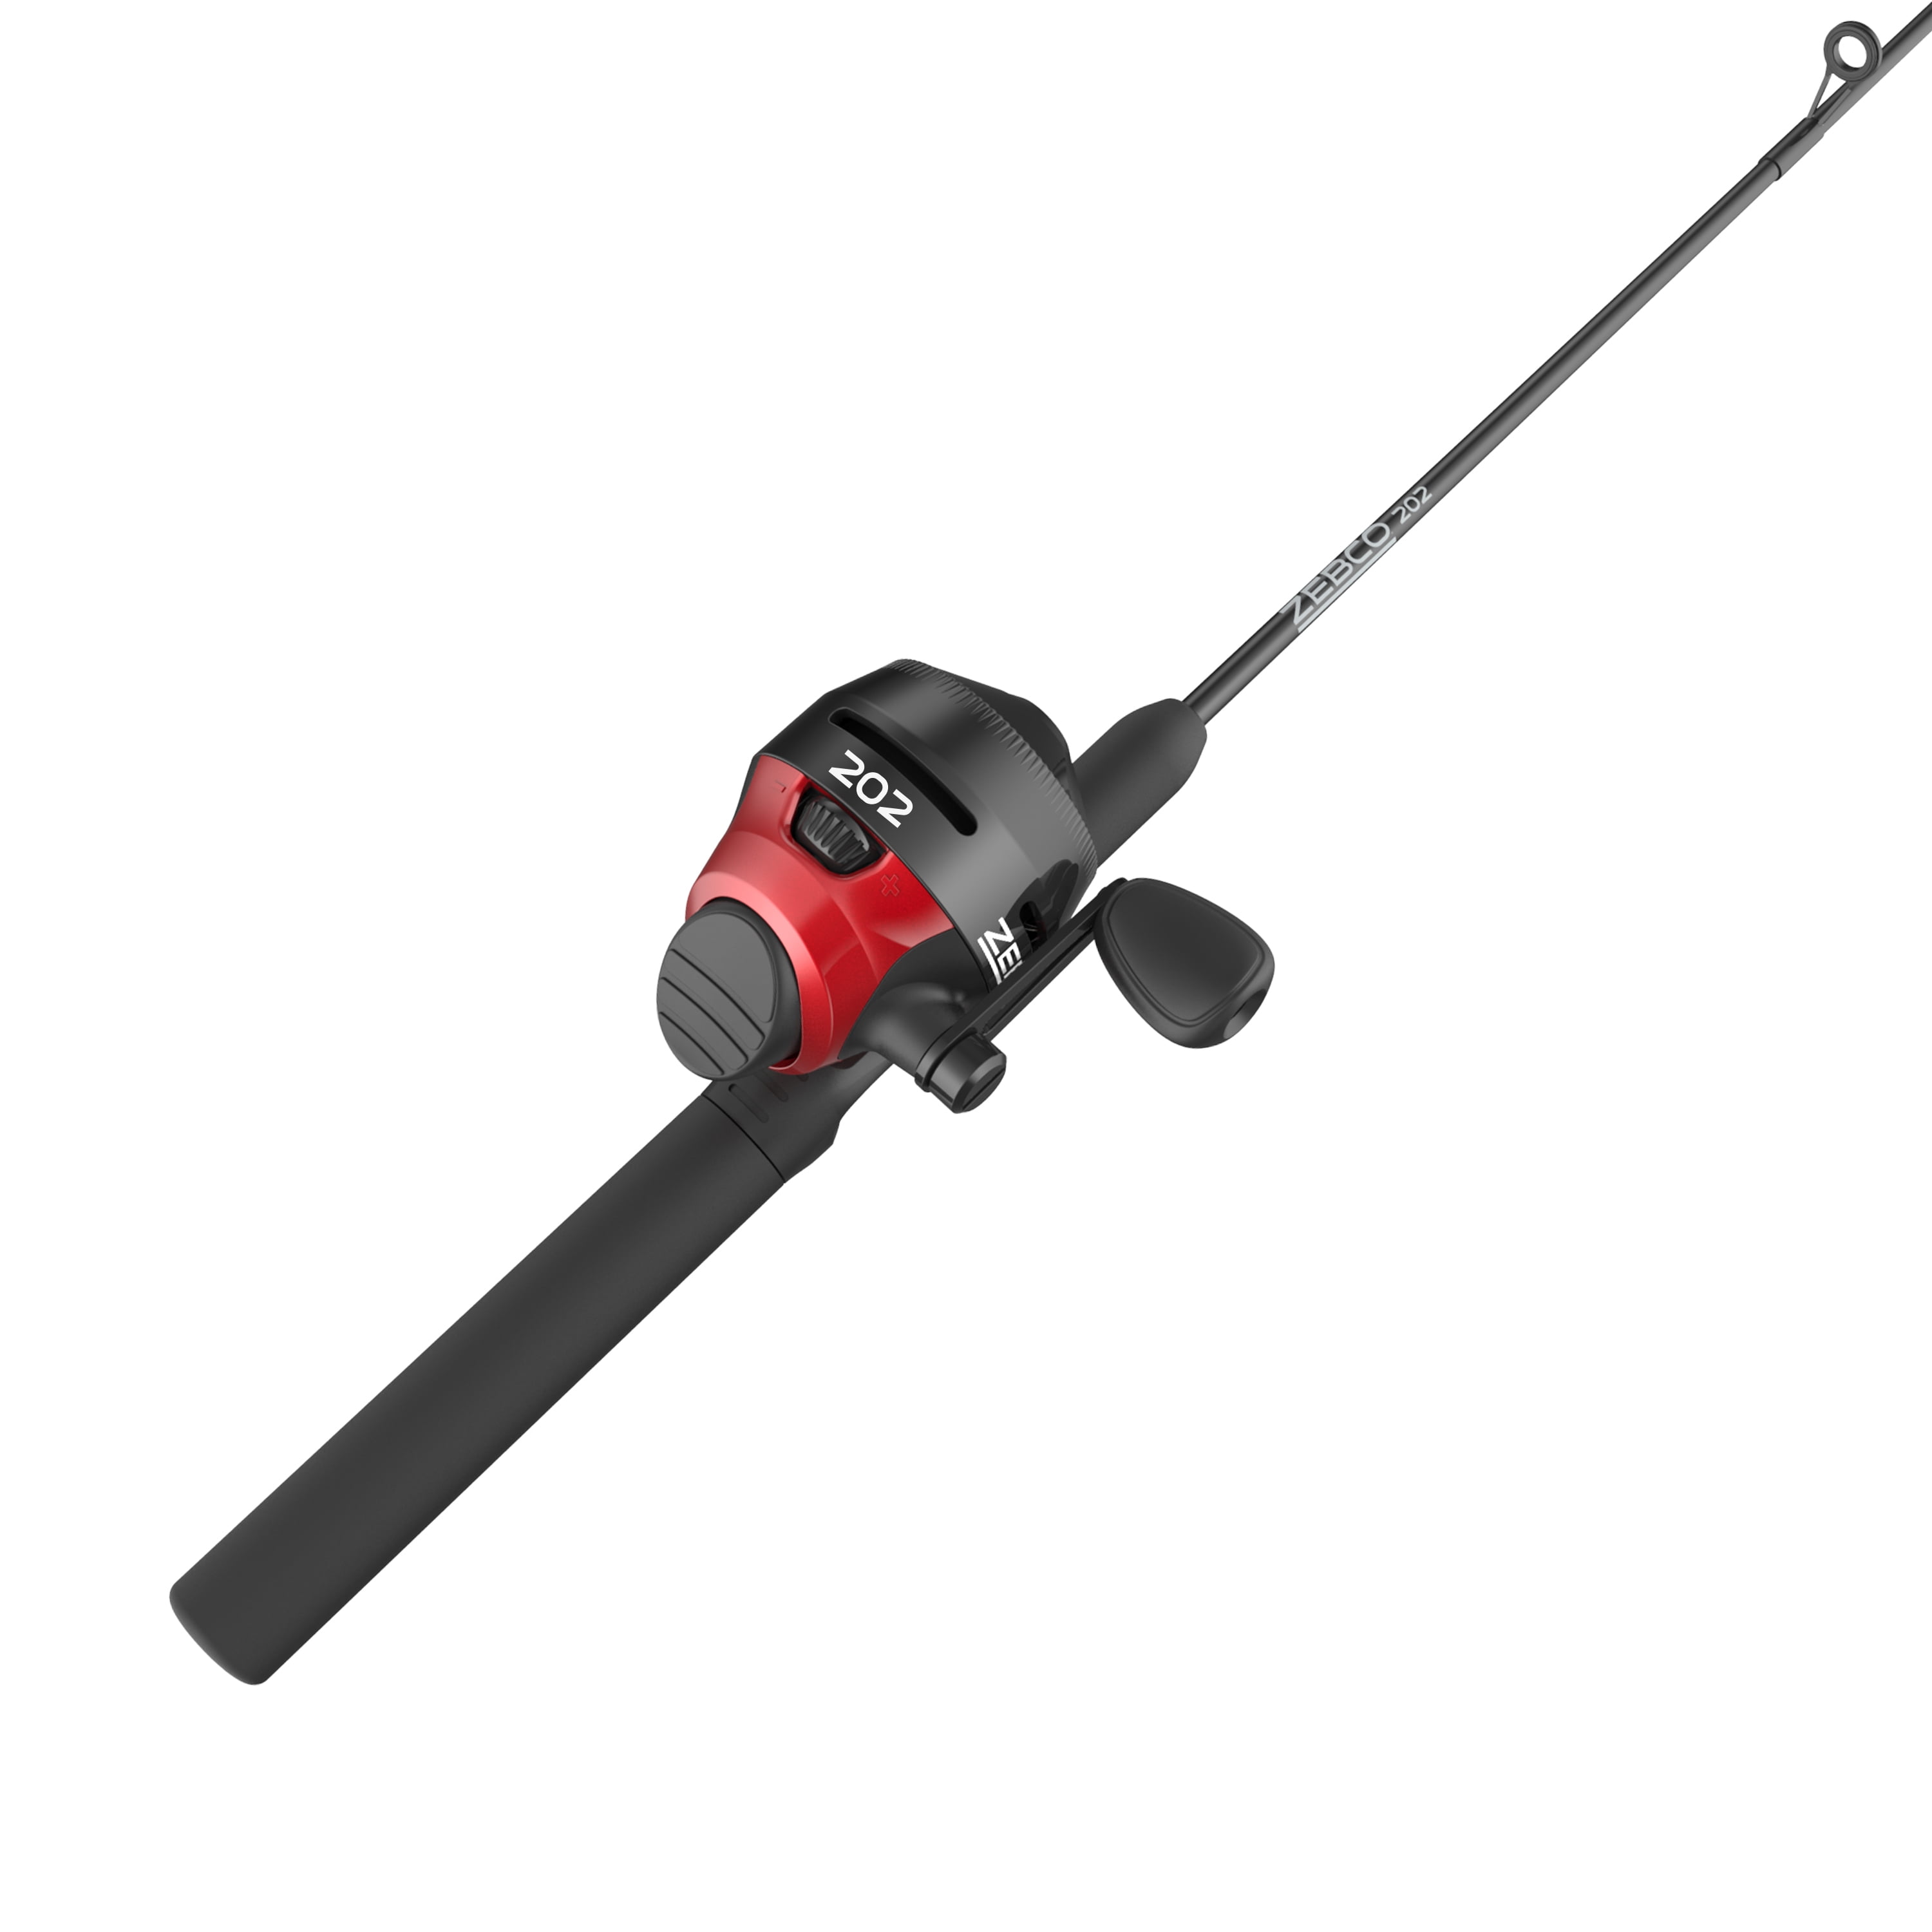 Zebco 202 5'6" 2 Piece Med-light Fishing With Bonus Tackle Easy To Use Reel 